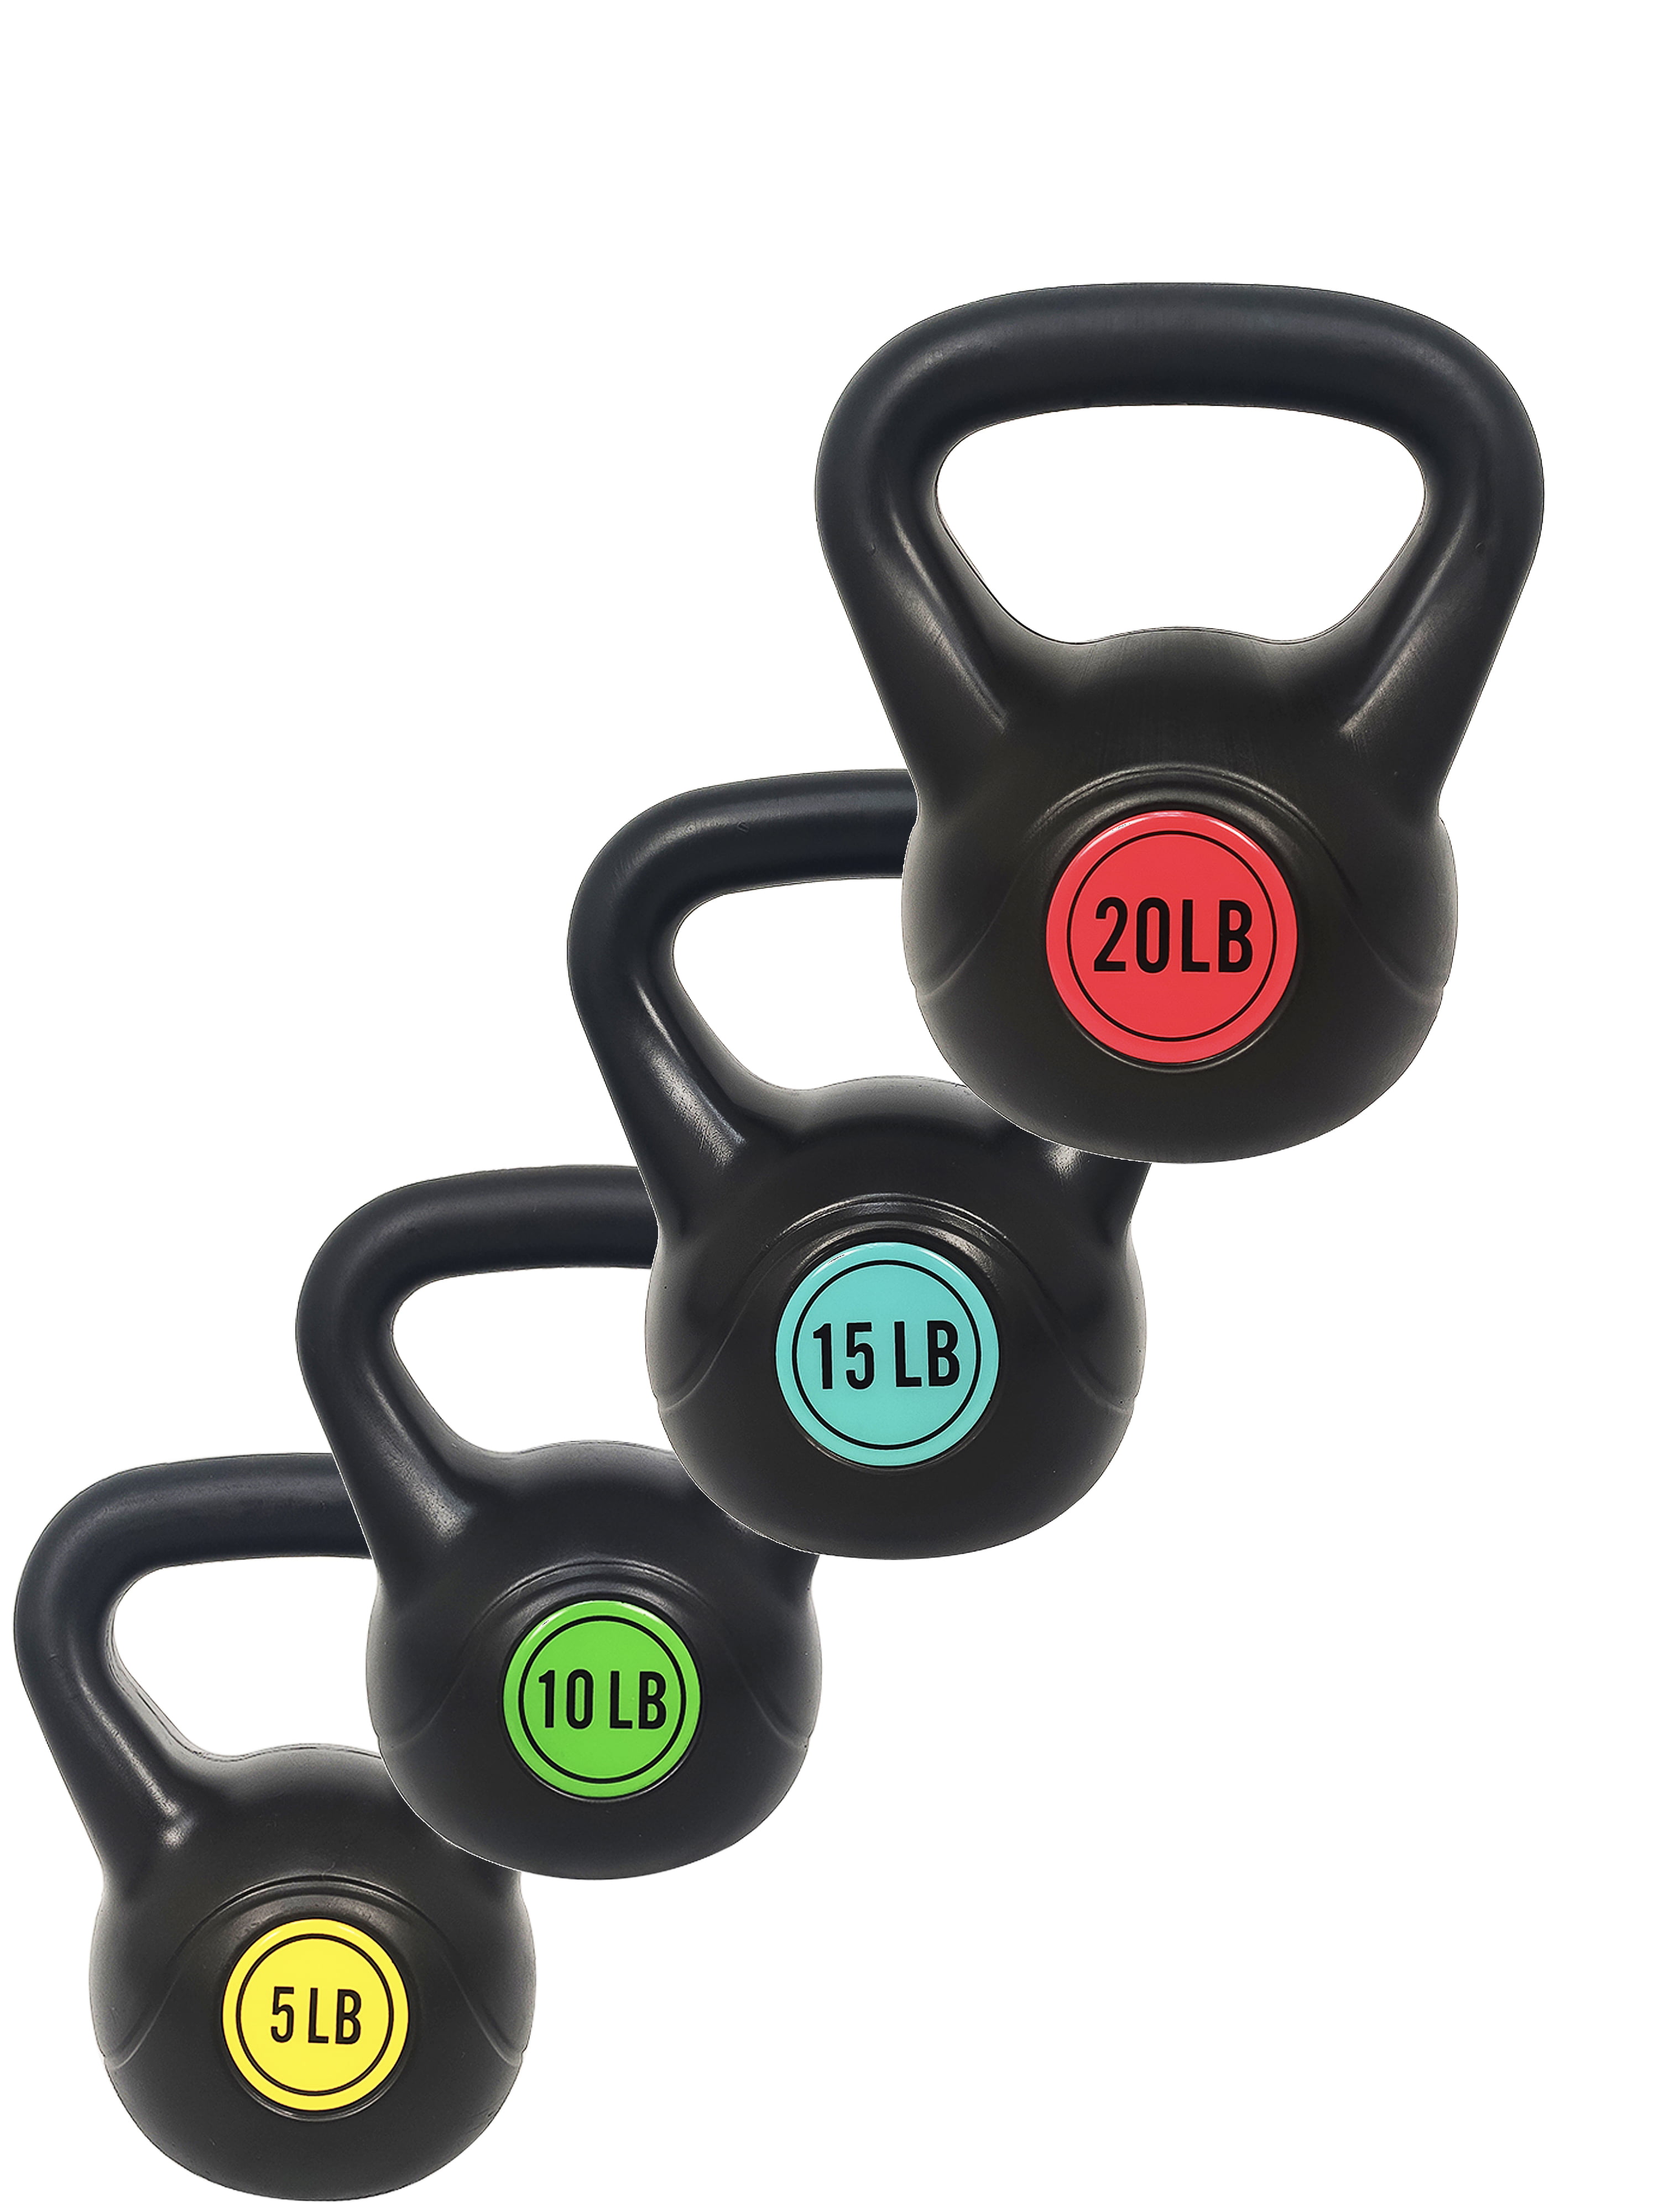 Tone Muscles Calorie Burn Workout Fitness Home Gym Exercise Weider Kettlebell 